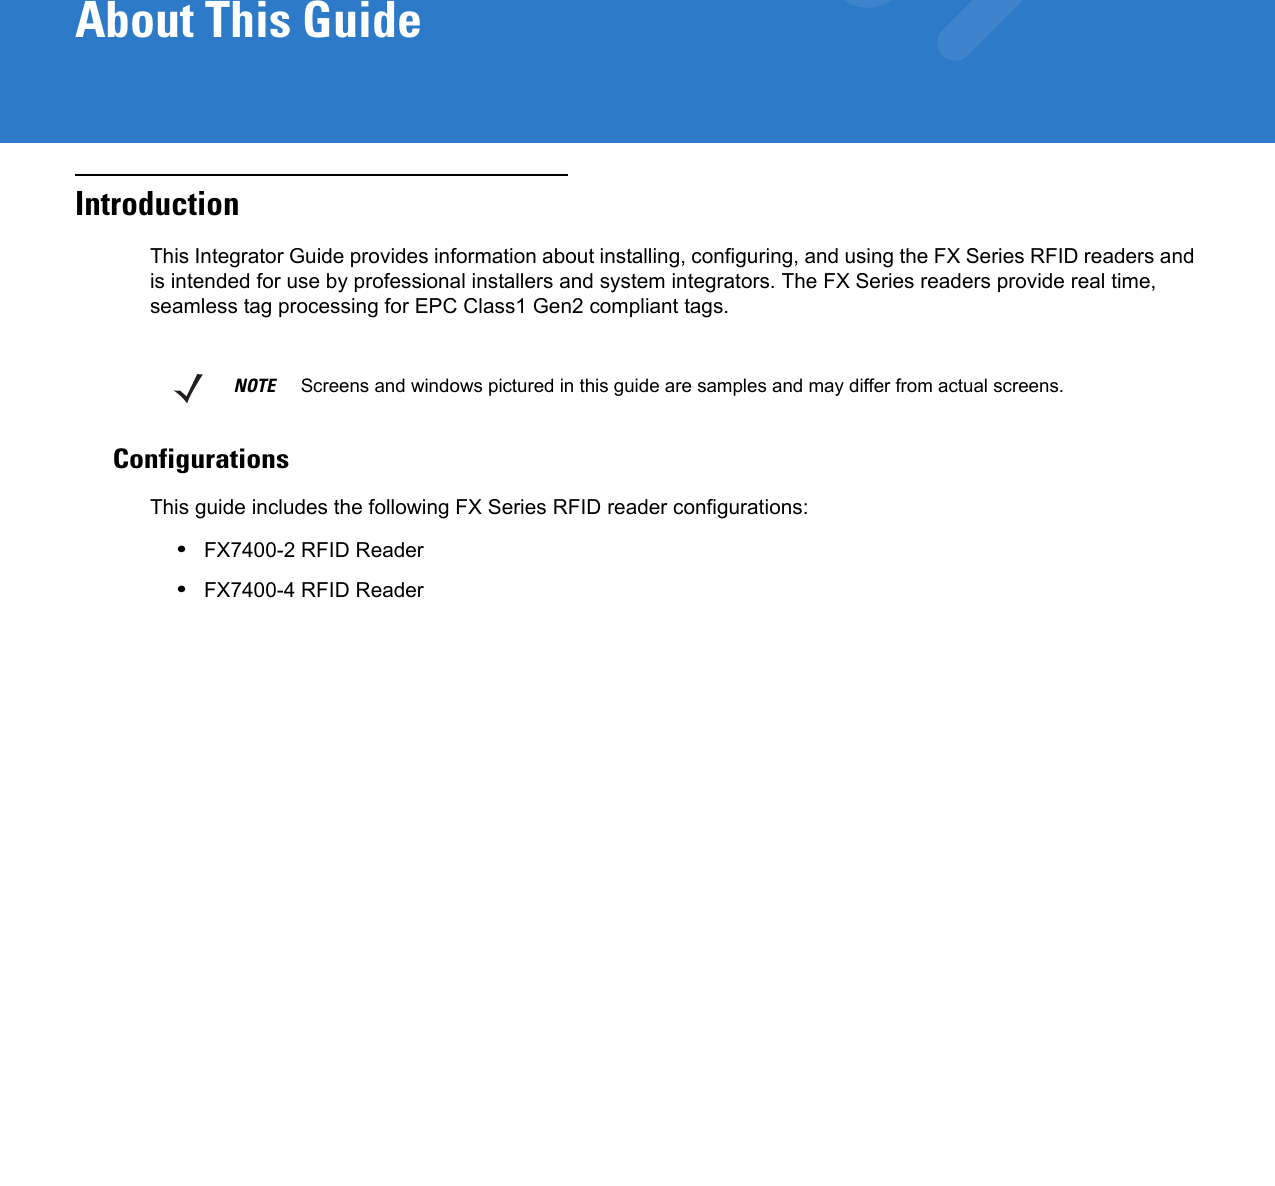 About This GuideIntroductionThis Integrator Guide provides information about installing, configuring, and using the FX Series RFID readers and is intended for use by professional installers and system integrators. The FX Series readers provide real time, seamless tag processing for EPC Class1 Gen2 compliant tags.ConfigurationsThis guide includes the following FX Series RFID reader configurations: •FX7400-2 RFID Reader•FX7400-4 RFID ReaderNOTE     Screens and windows pictured in this guide are samples and may differ from actual screens.